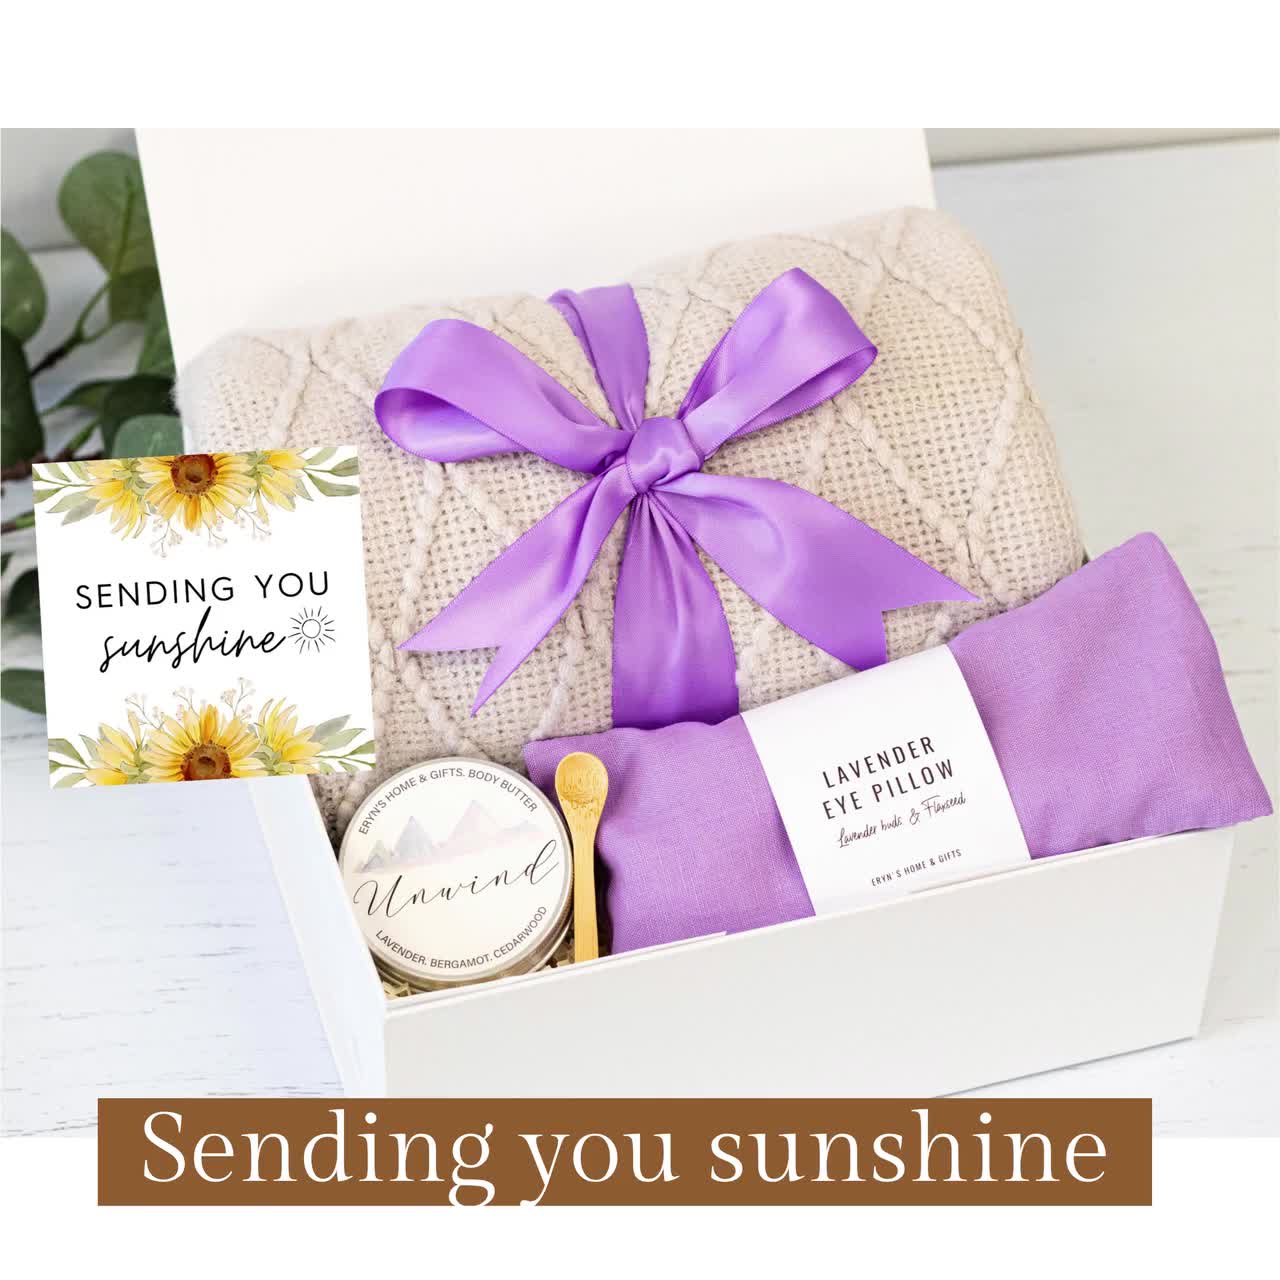 The Bee Box, Care Package, Bestie Gift, Hygge Box - Spouse-ly